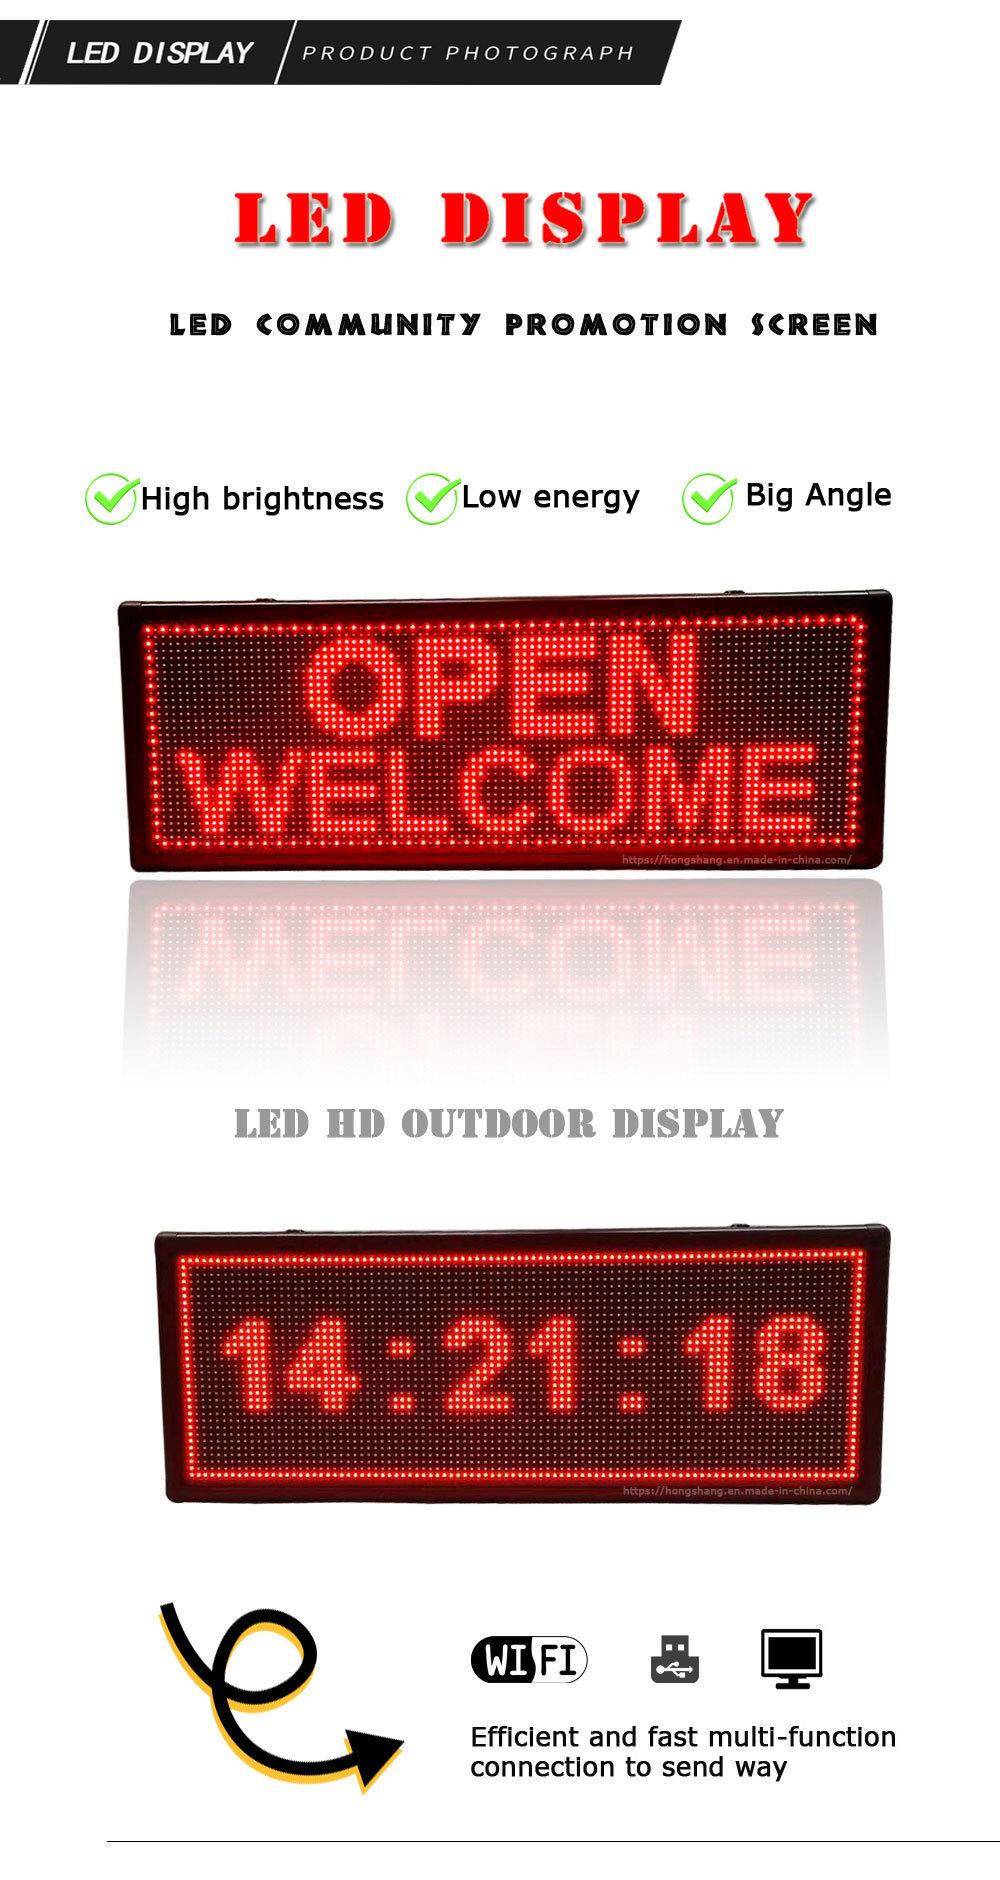 Outdoor P10 LED Billboards Are Used for Promotional Information Screens